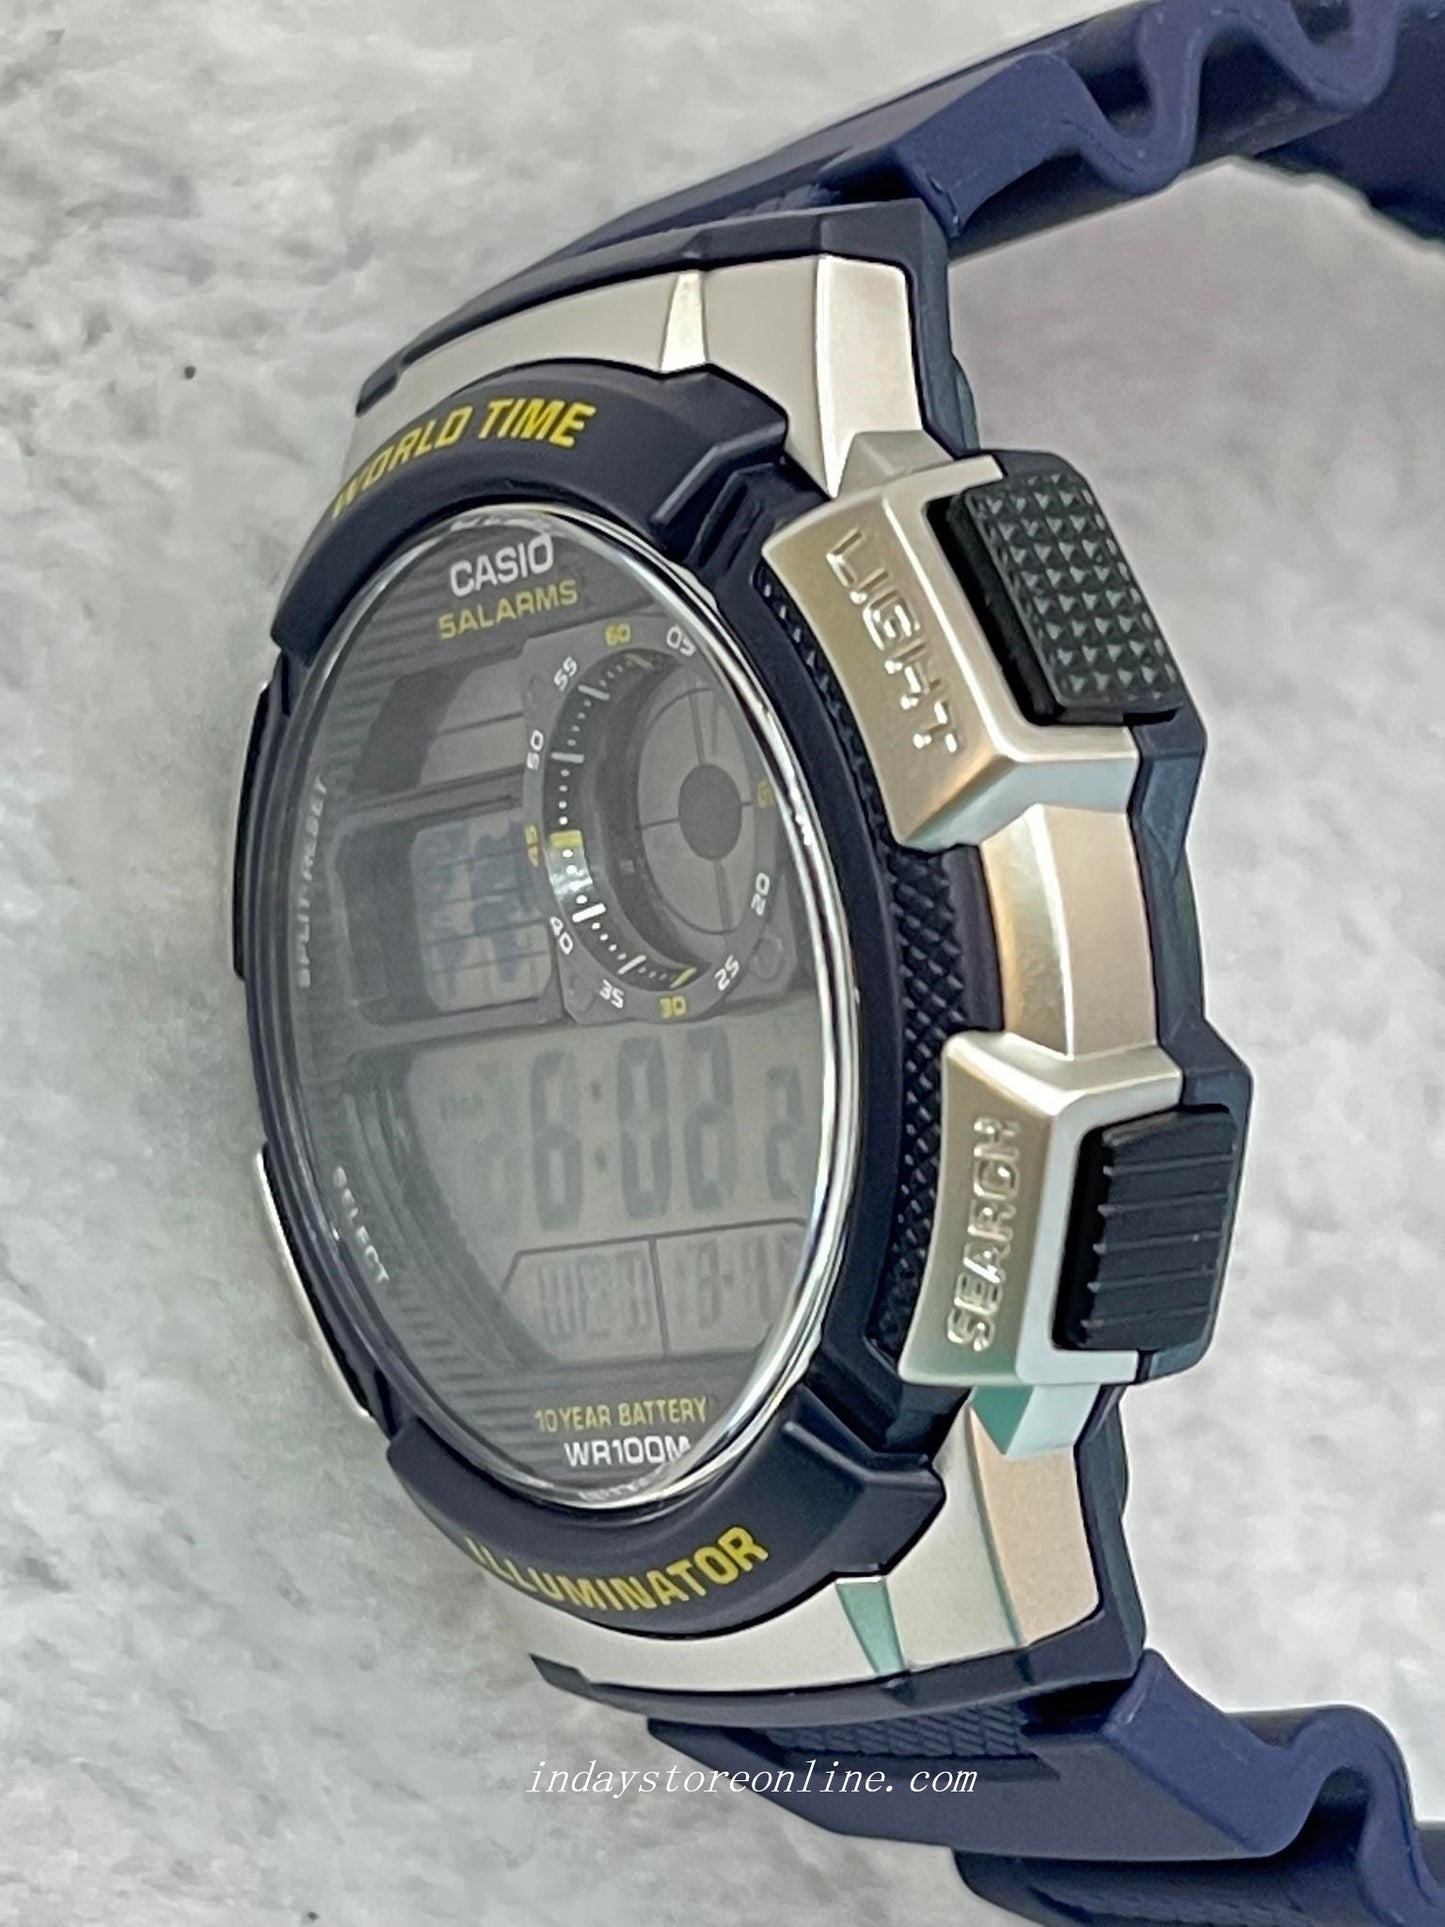 Casio Digital Men's Watch AE-1000W-2A Digital Resin Band Resin Glass Battery Life: 10 years